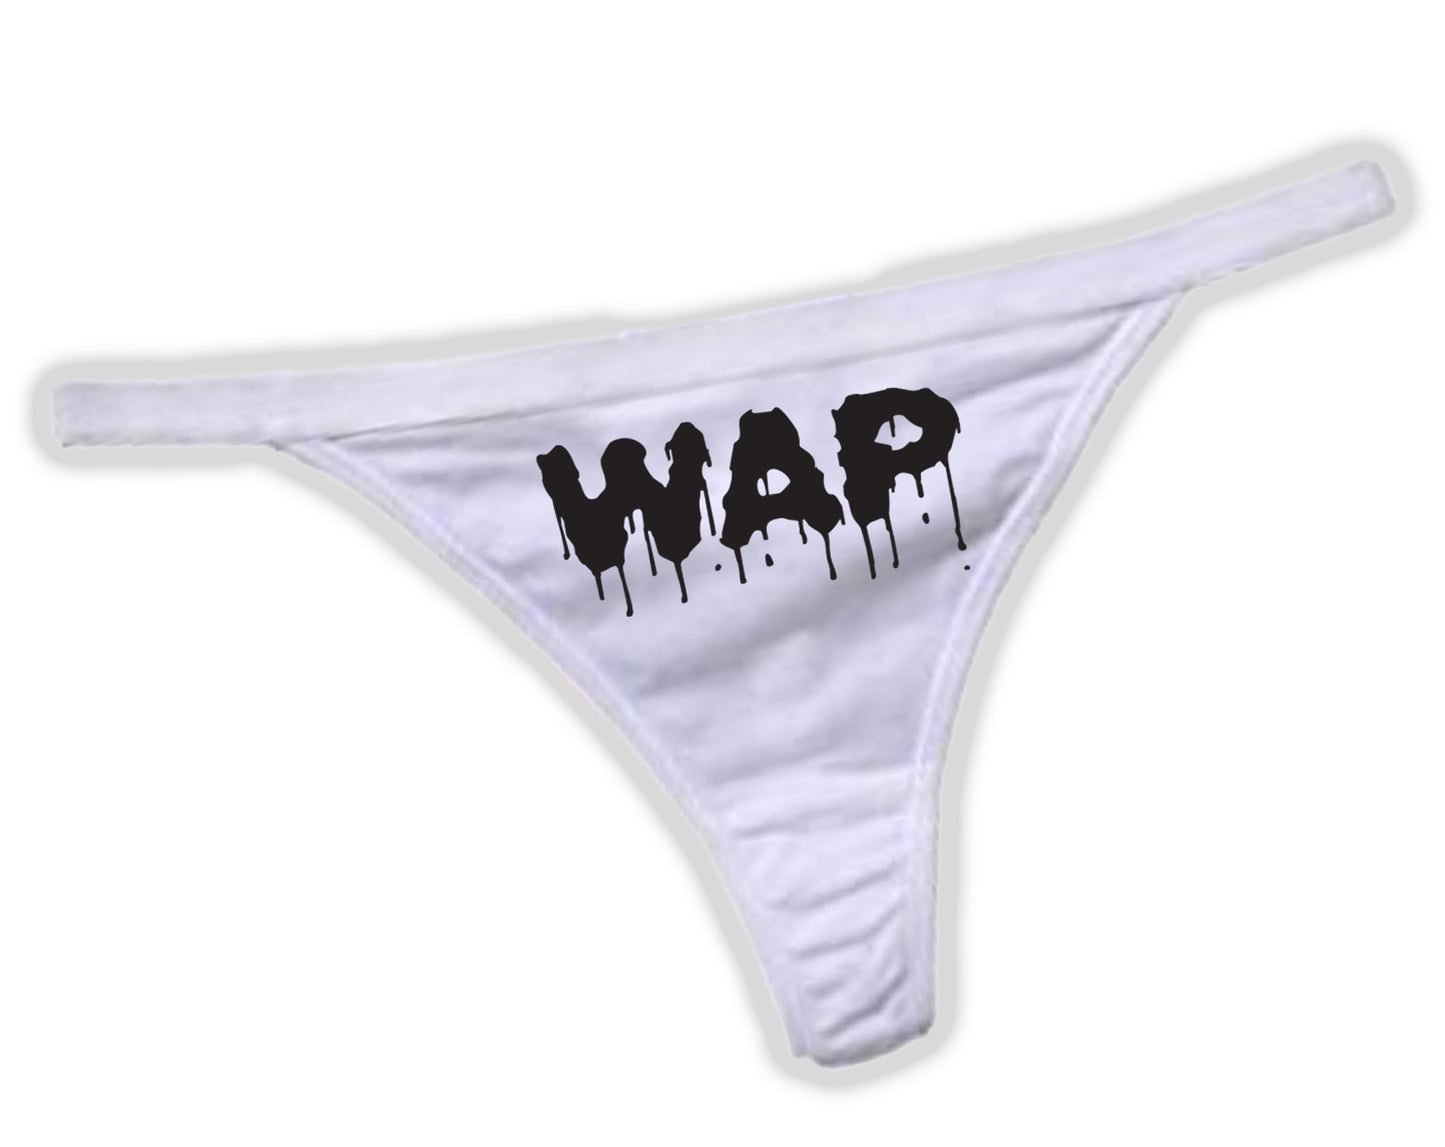 A pair of white panties with black vinyl dripping the word WAP on the front